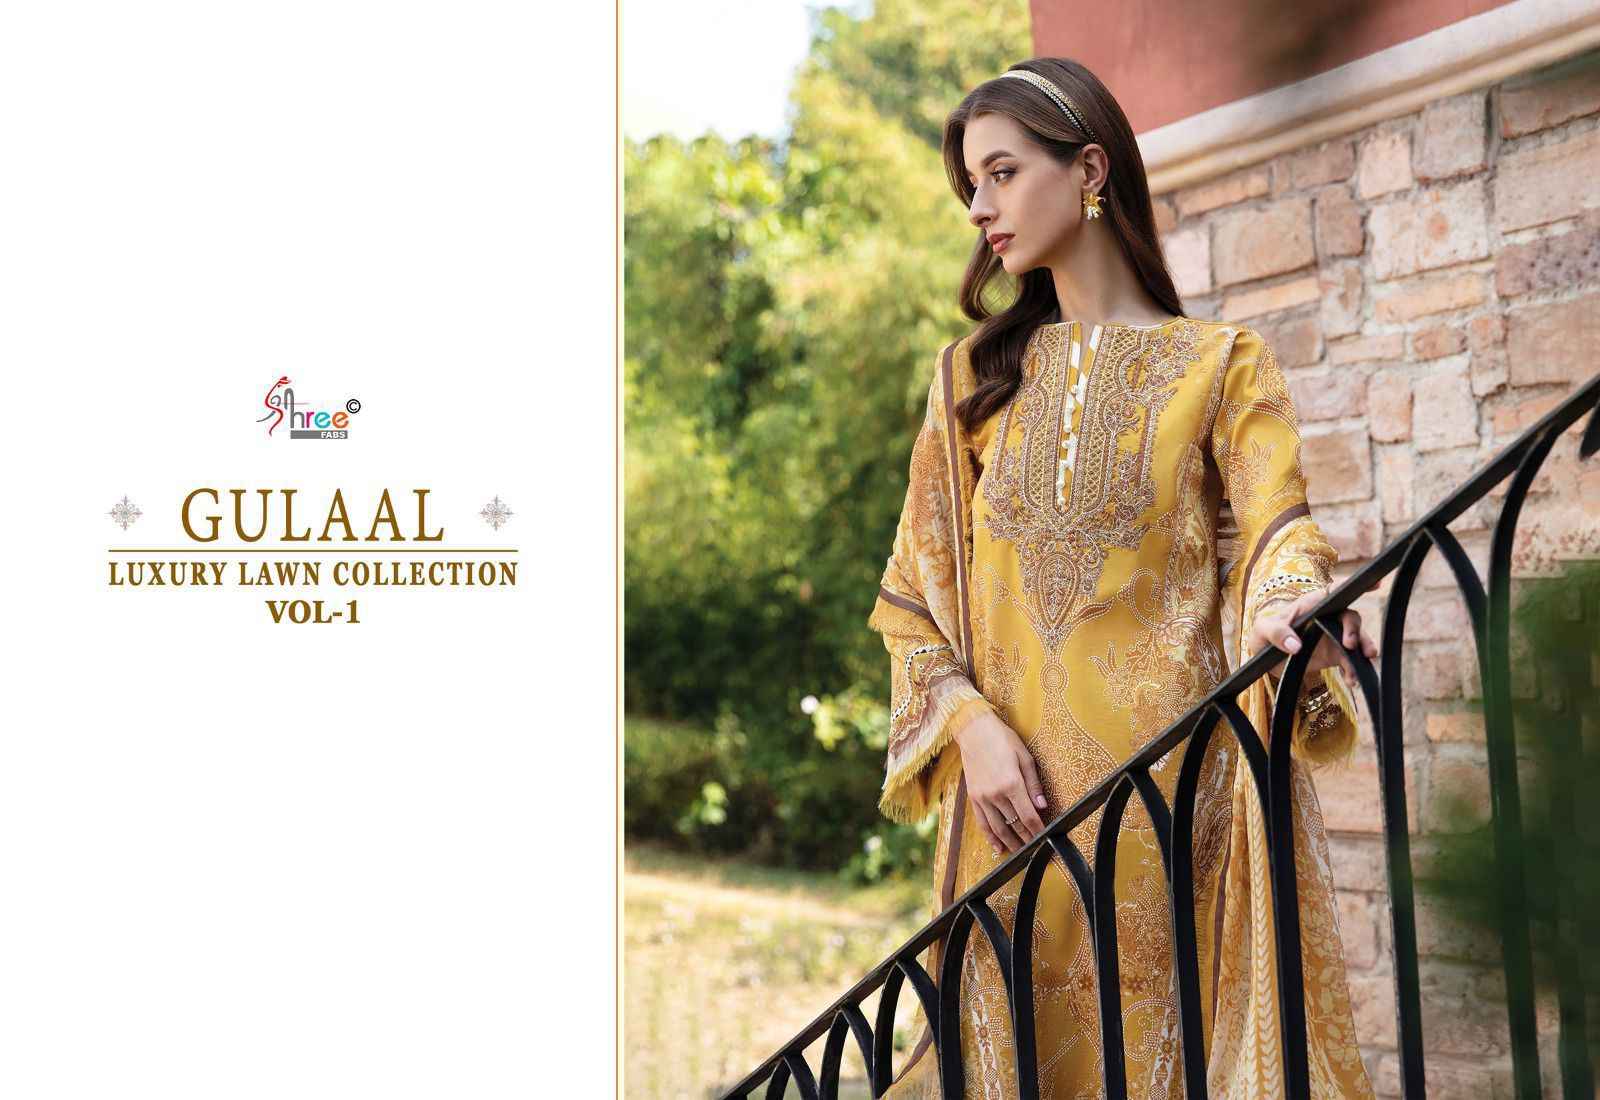 Shree Fab Gulaal Luxury Lawn Collection Vol-01 Dress Material (7 Pc catalog)